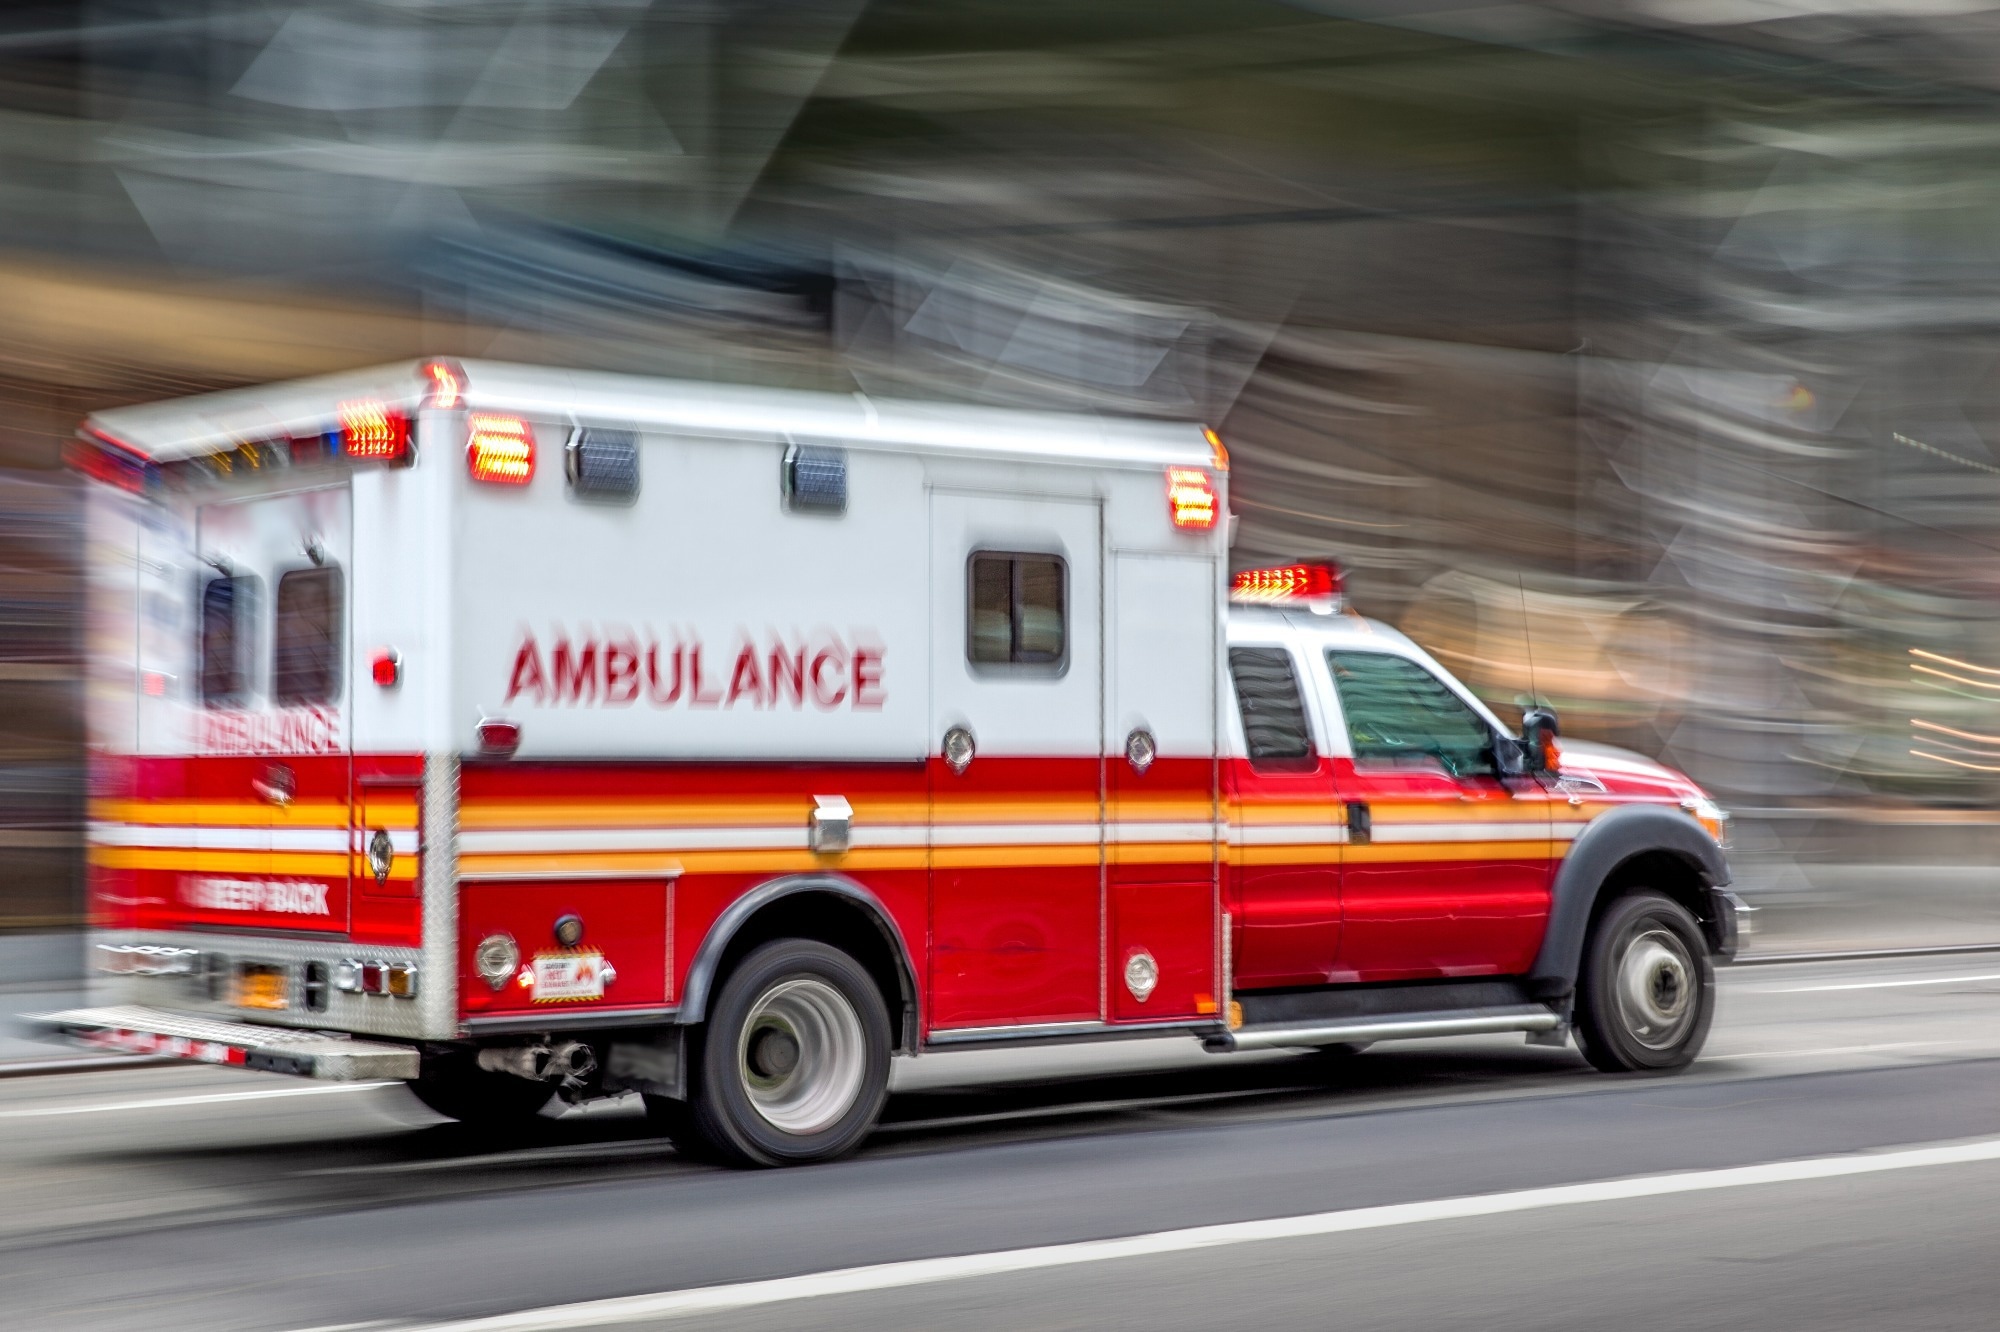 Study: A National assessment of EMS performance at the response and agency level. Image Credit: blurAZ / Shutterstock.com